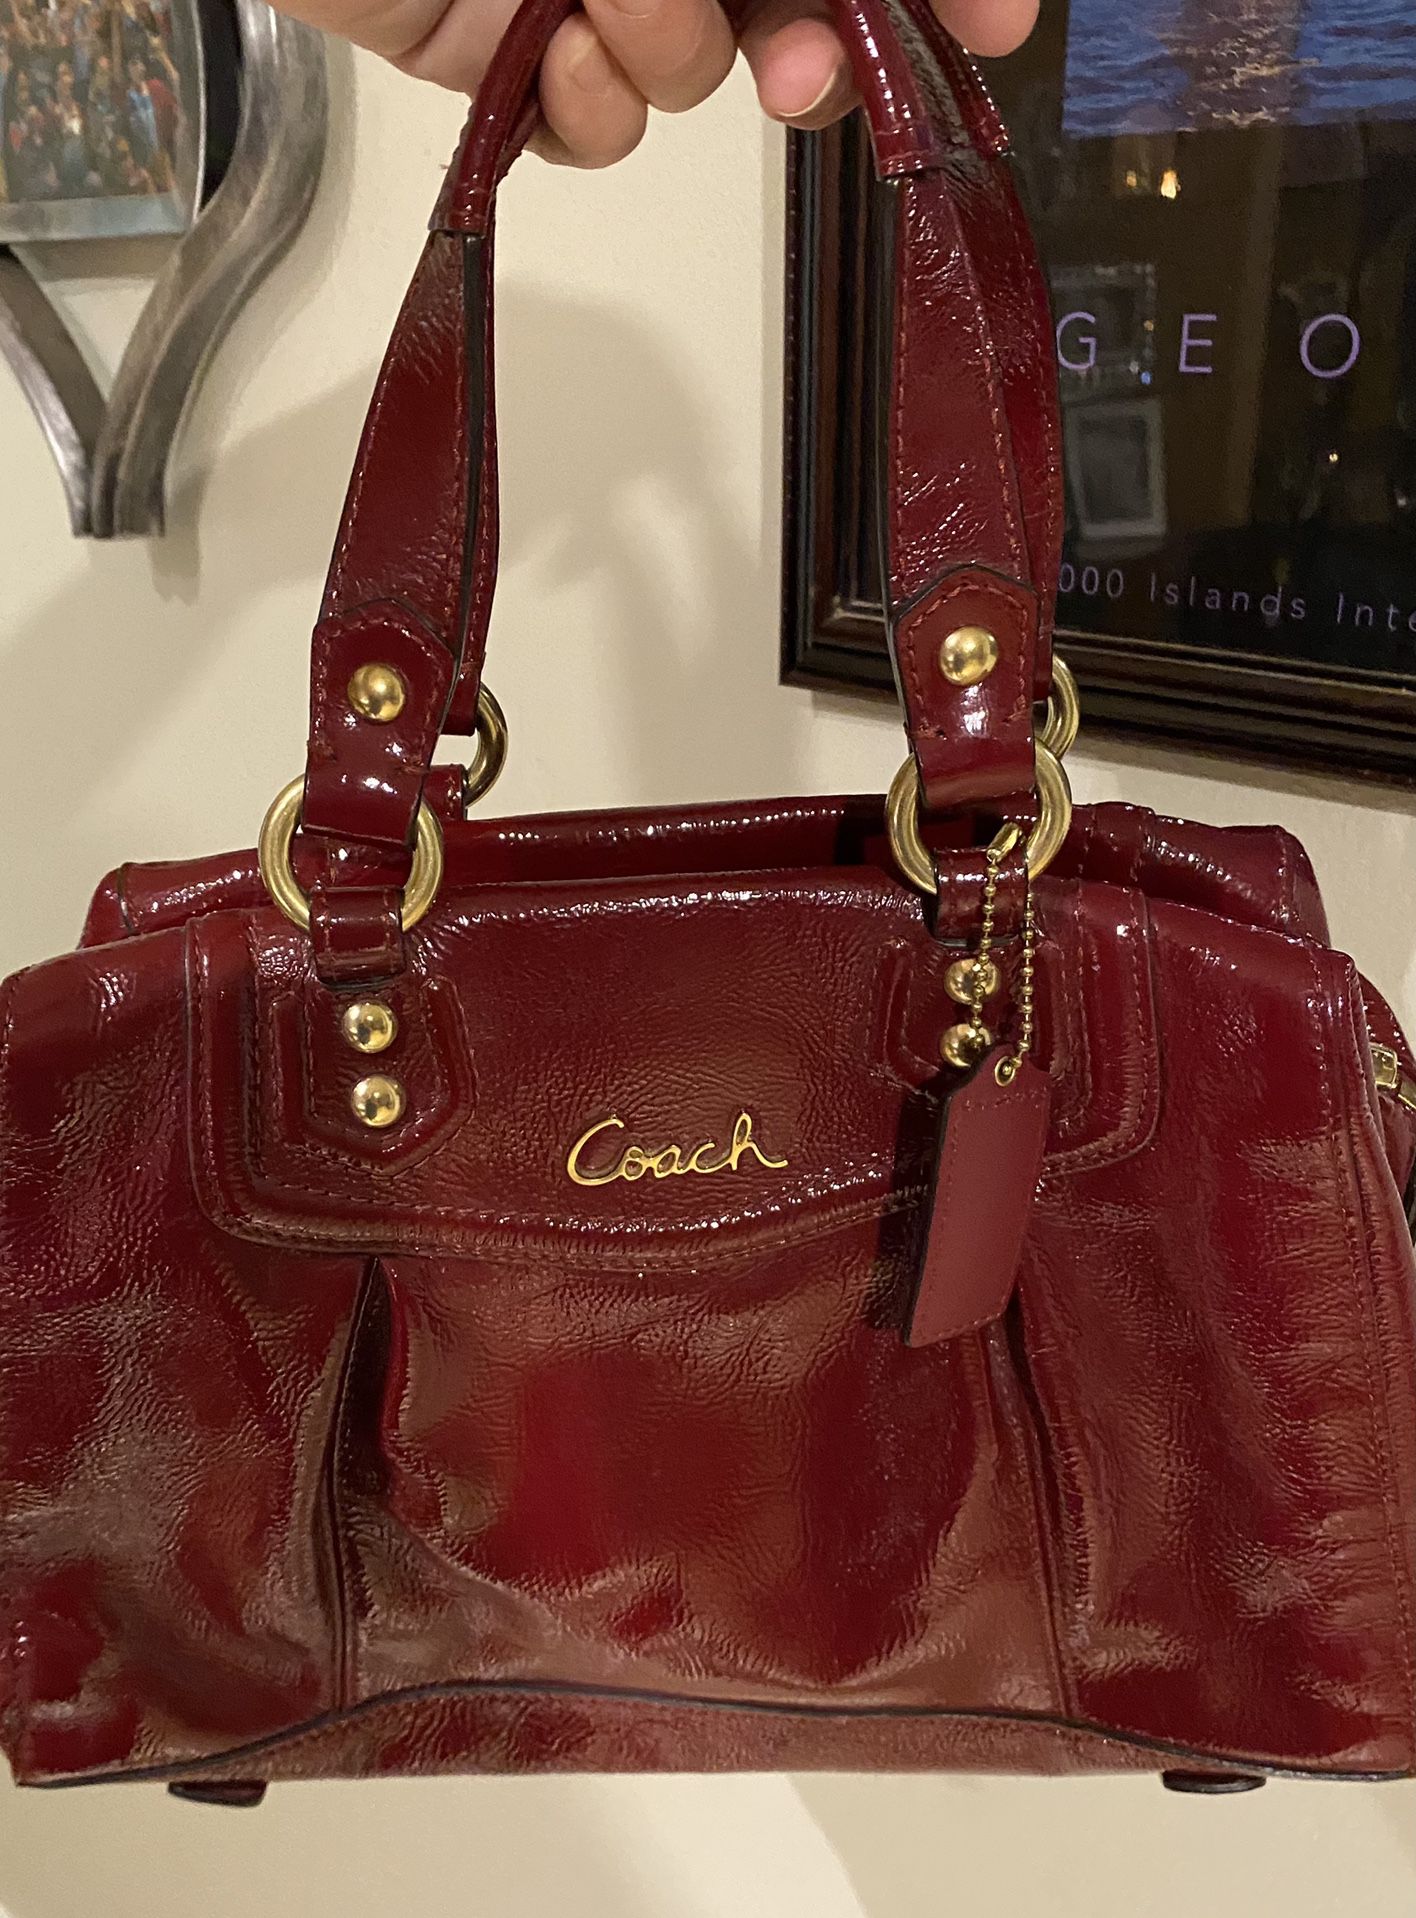 Patent Leather Coach Bag